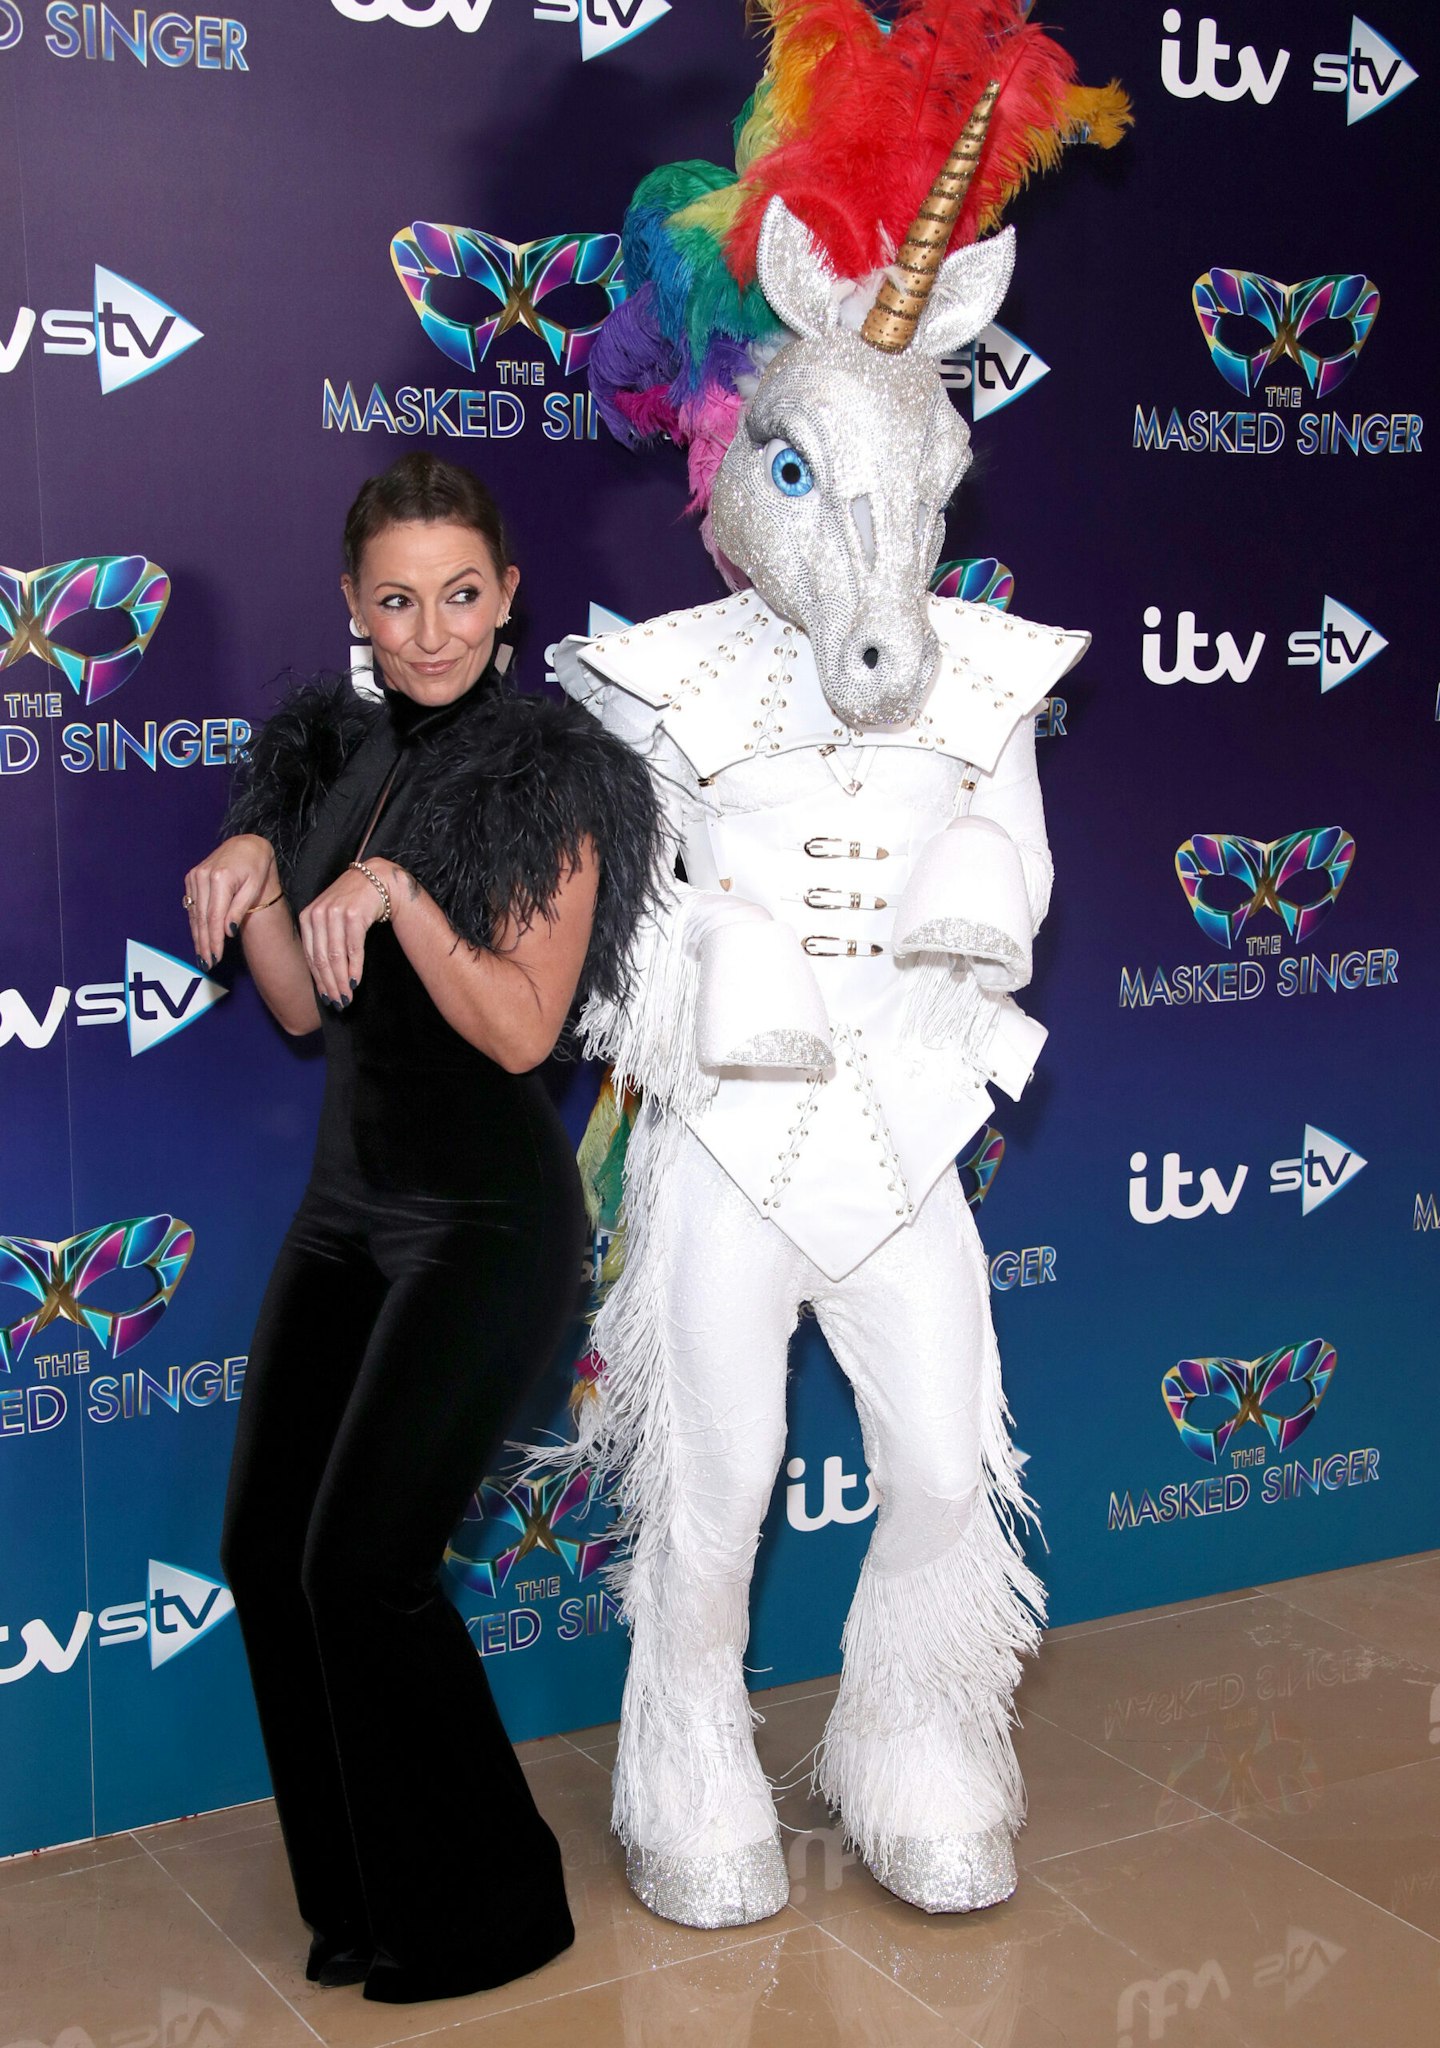 Davina McCall is a judge on The Masked Singer UK